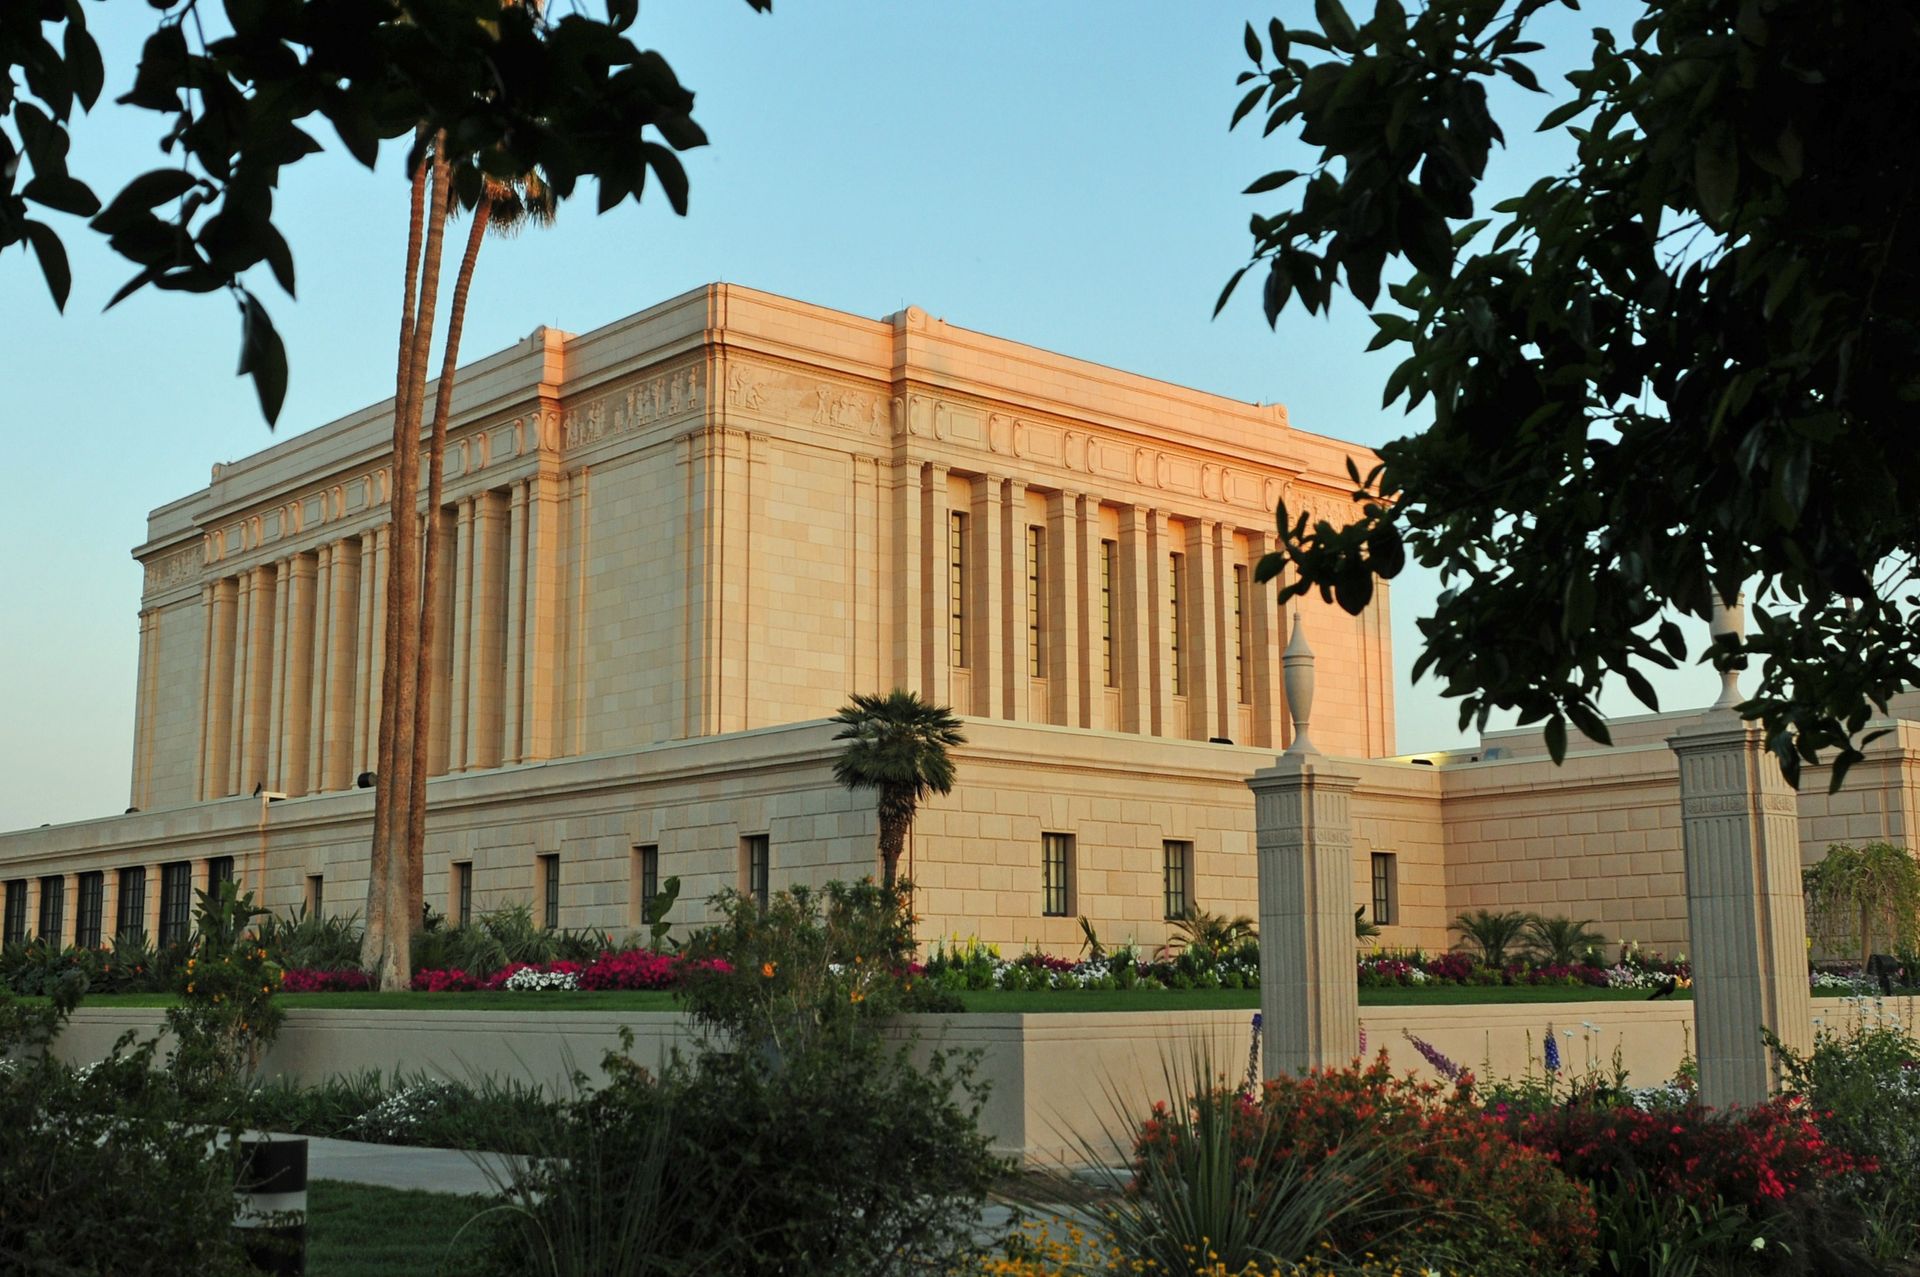 The Mesa Arizona Temple at sunset, including the exterior of the temple and scenery.